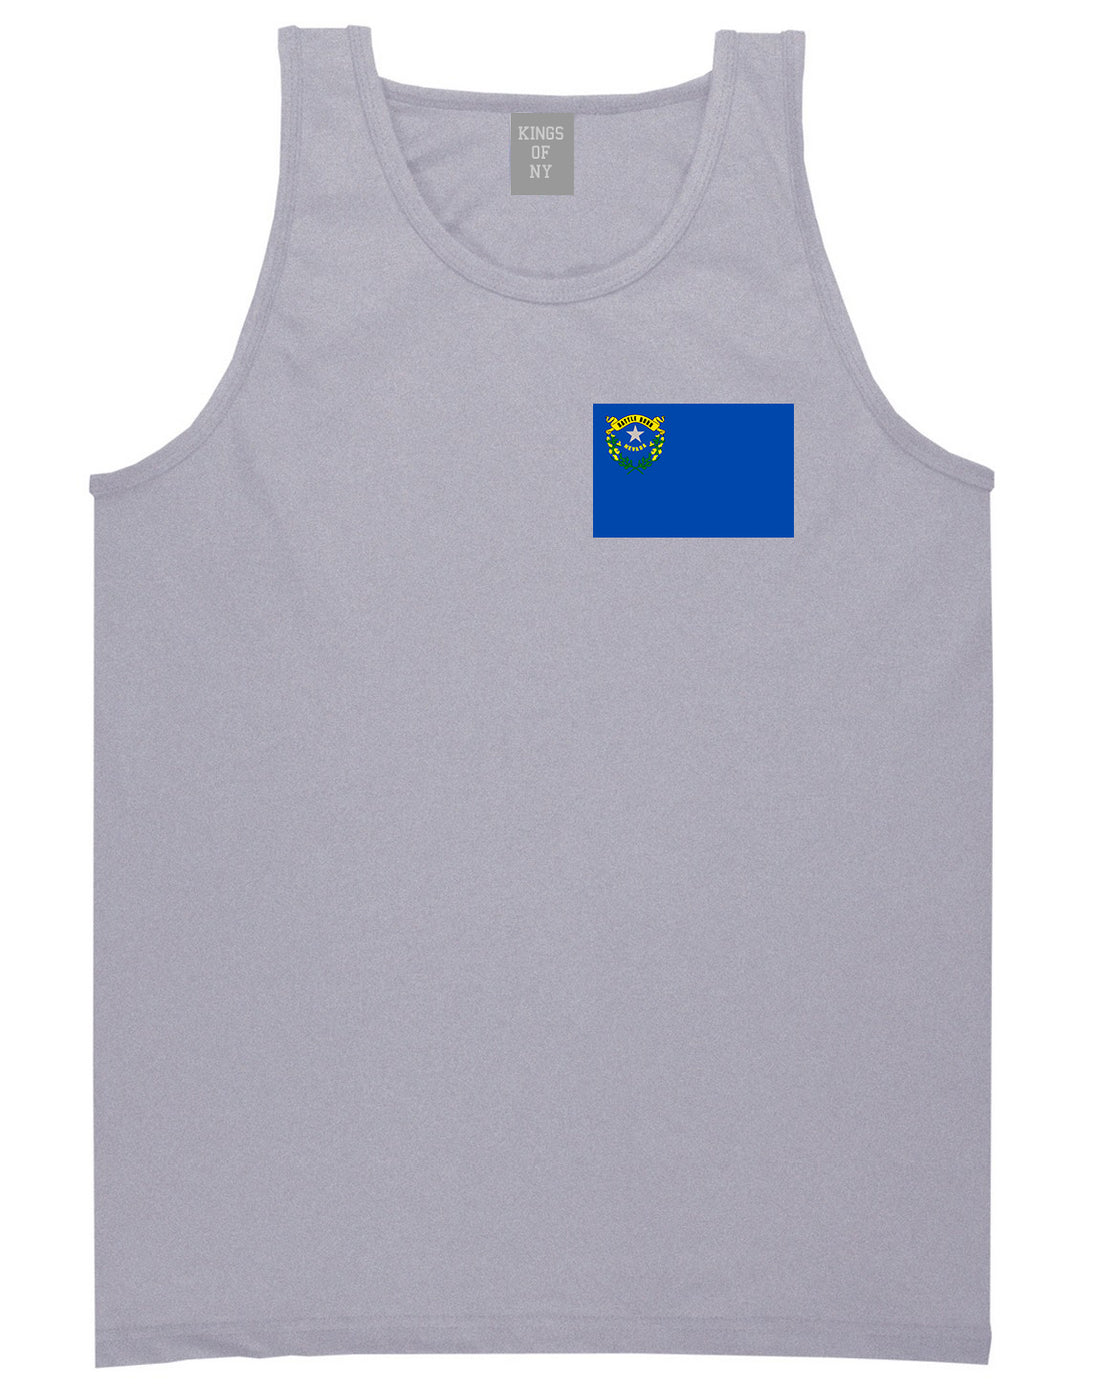 Nevada State Flag NV Chest Mens Tank Top T-Shirt Grey